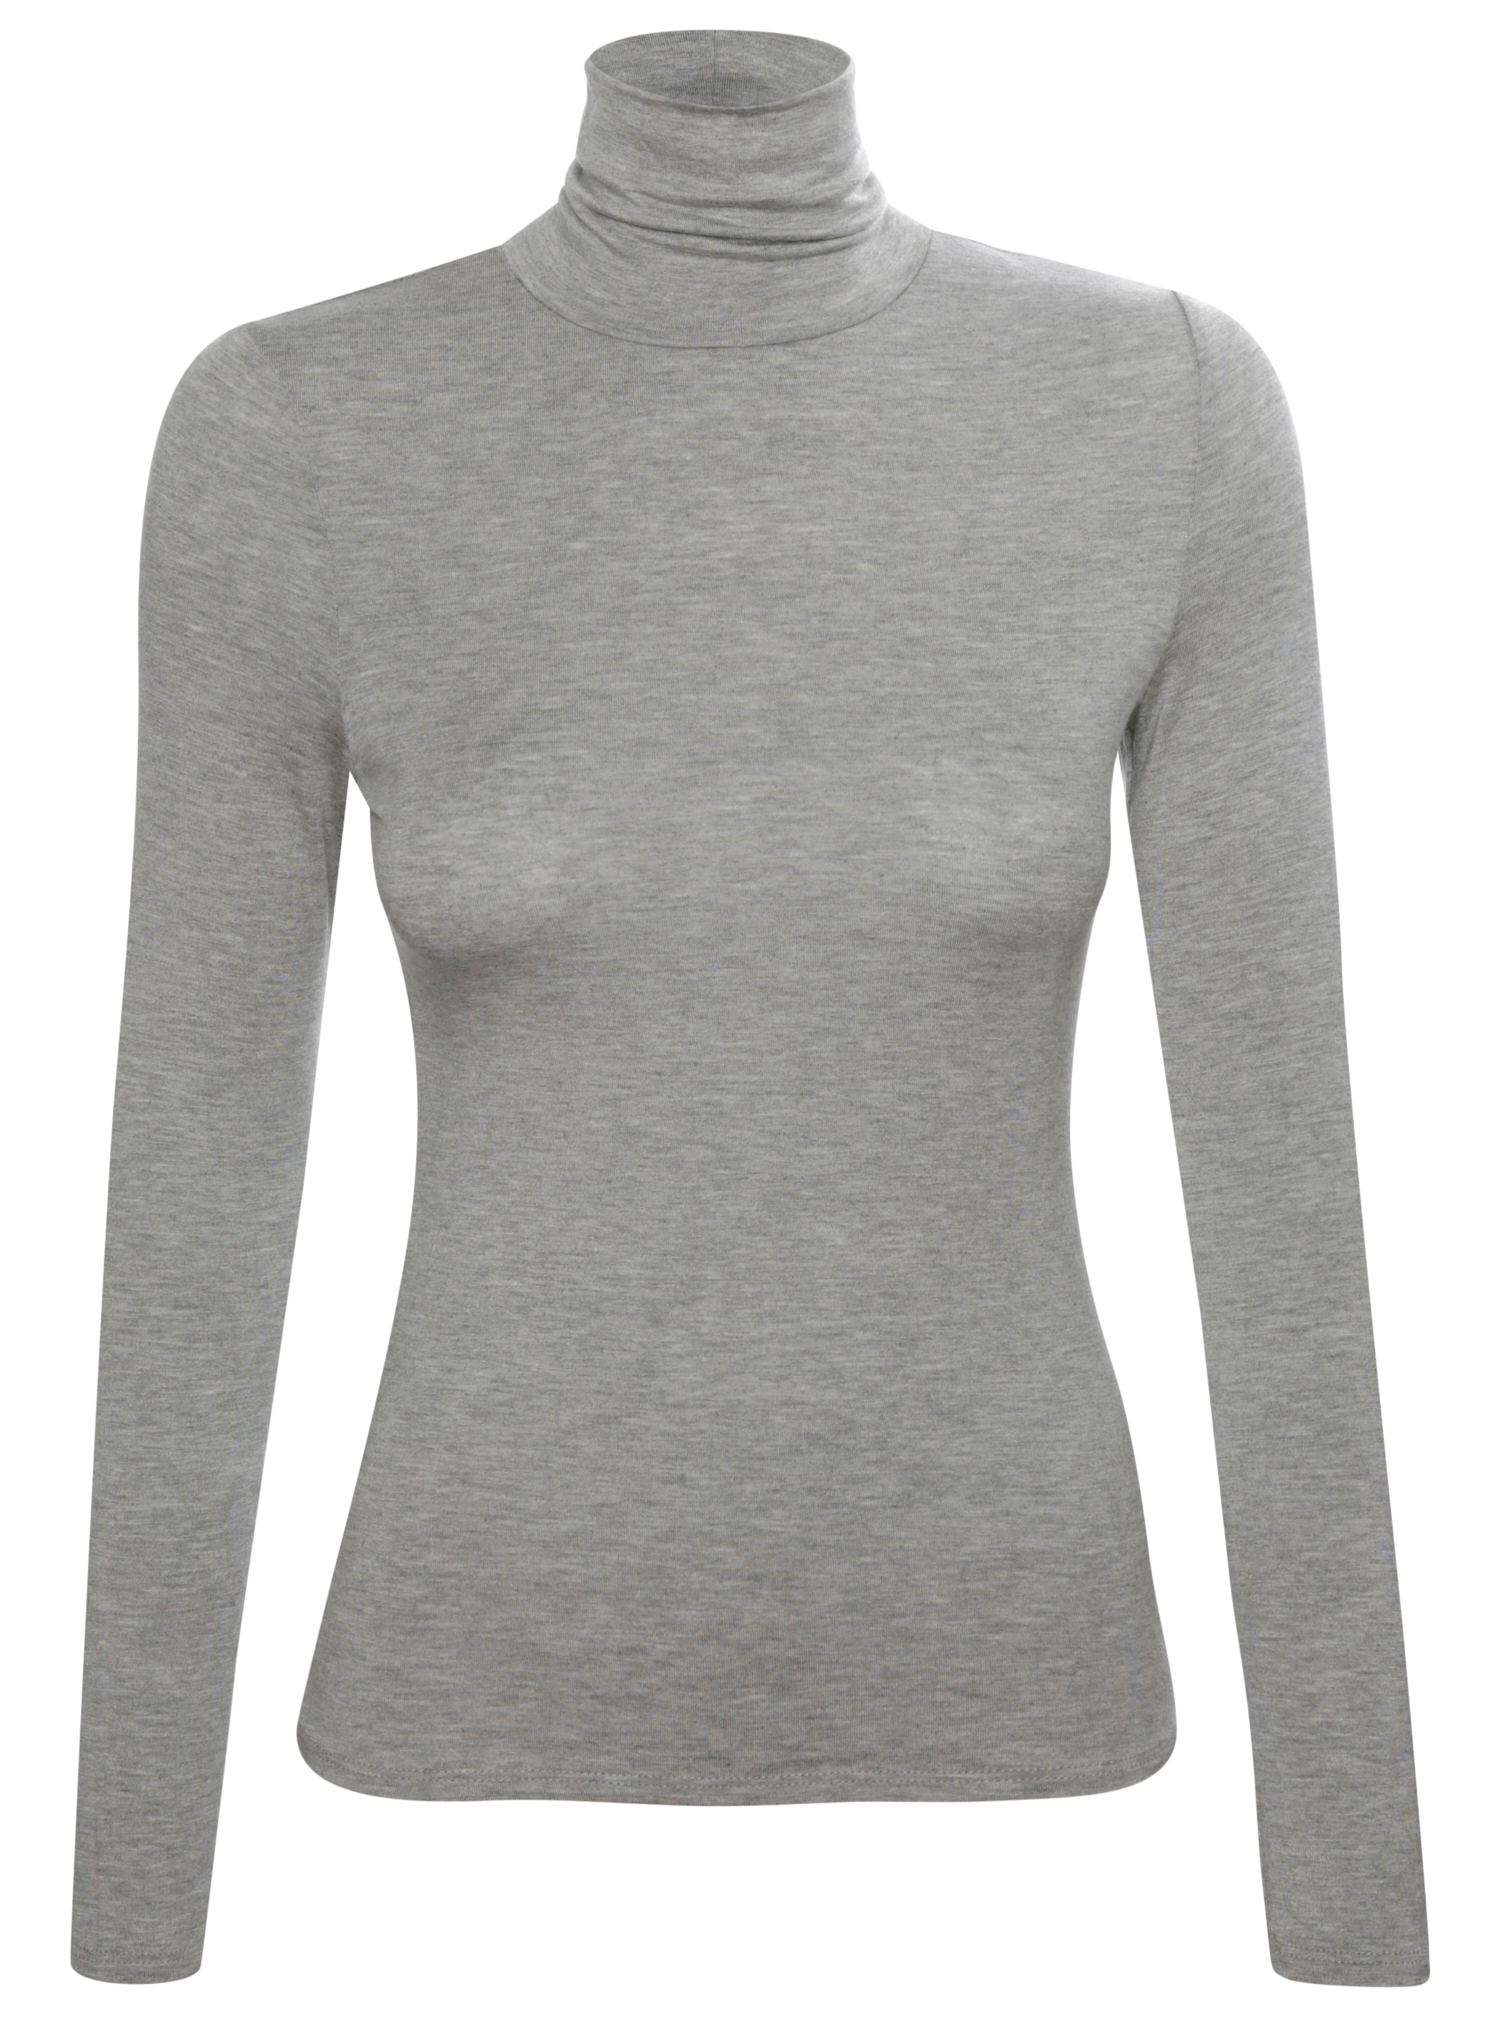 Fitted Turtleneck Long Sleeve Top